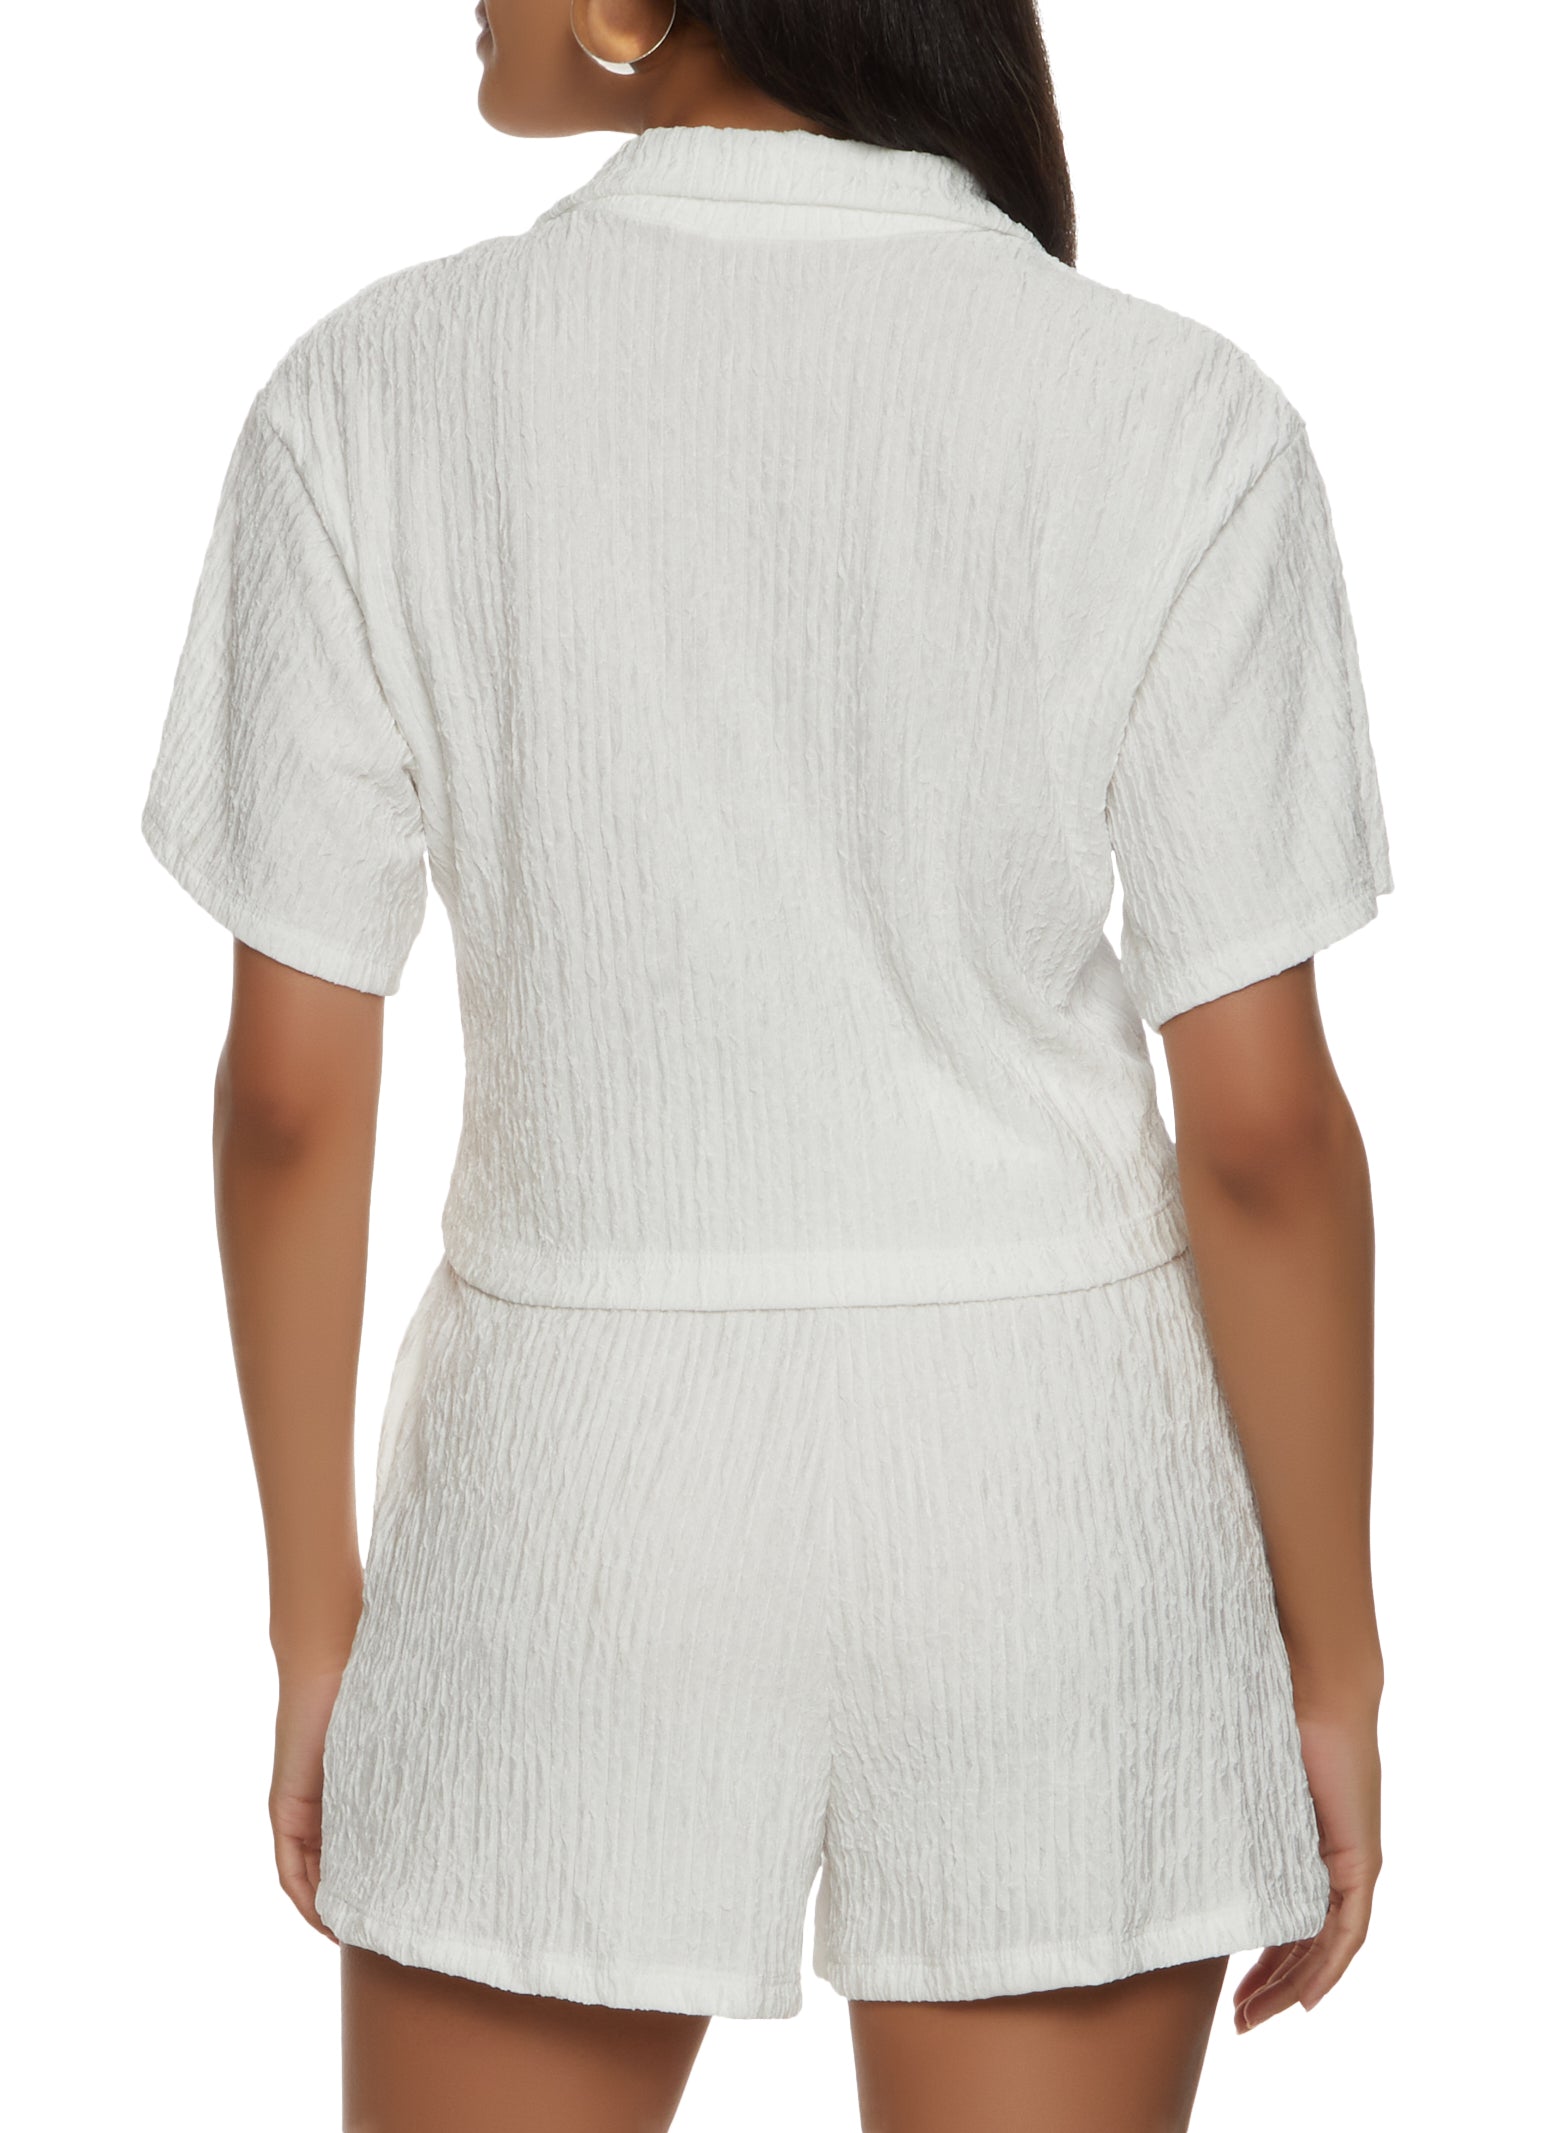 Womens Textured Knit Cropped Button Front Shirt, White, Size L